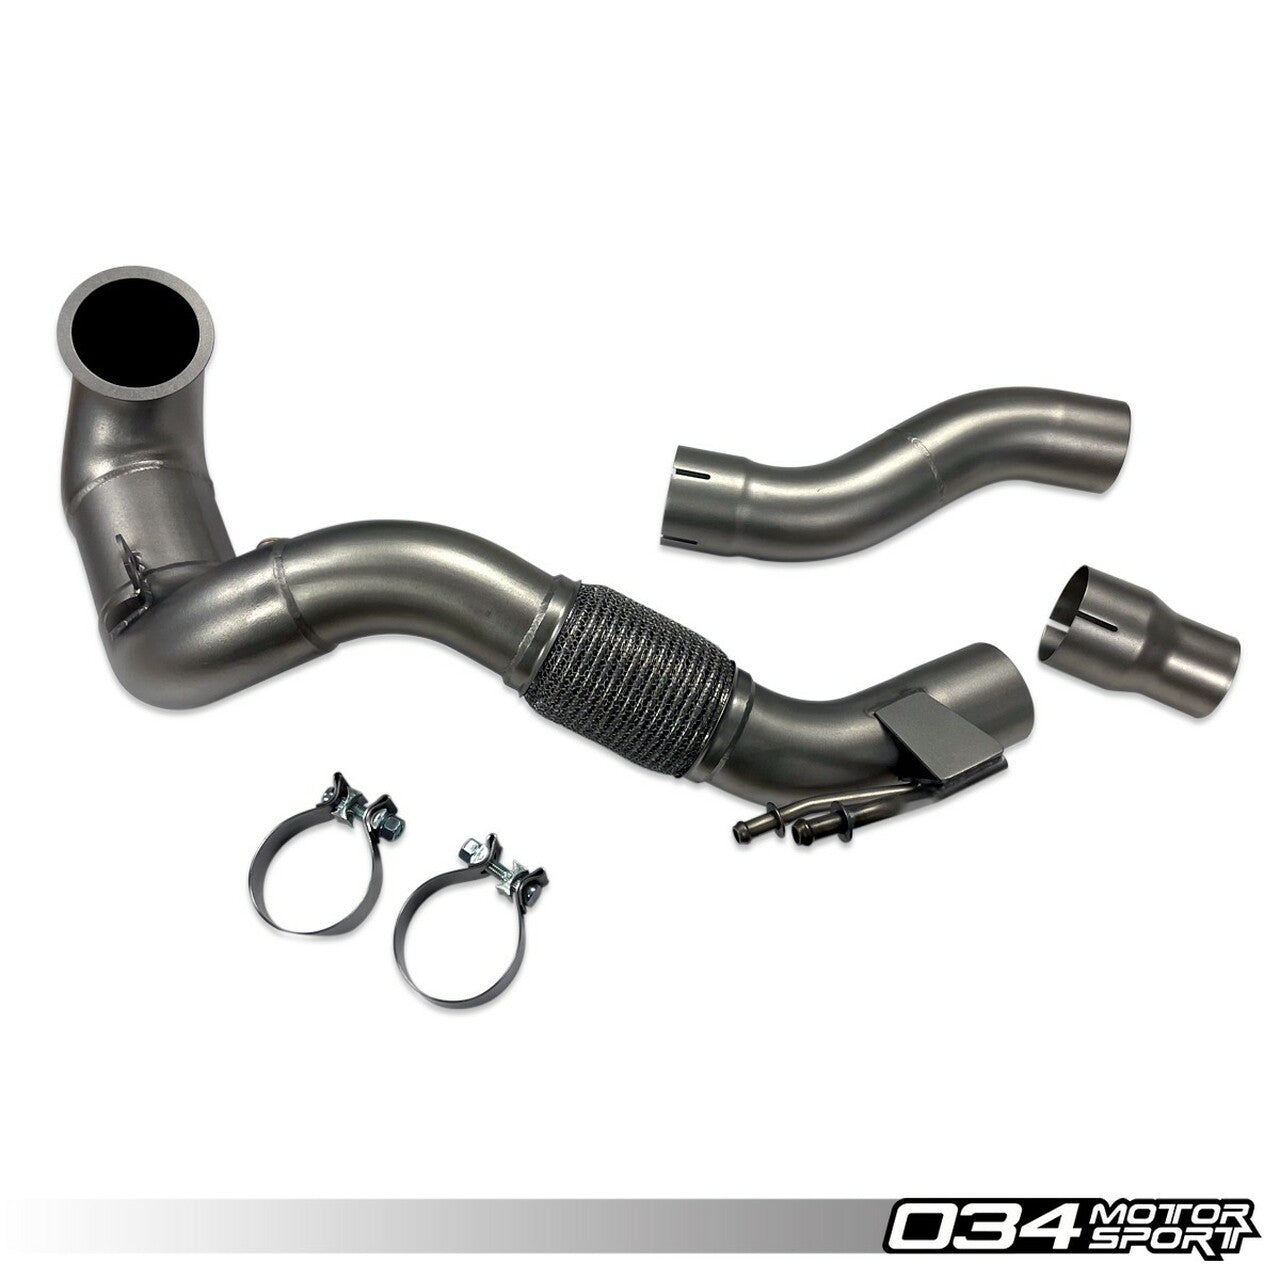 034Motorsport Cast Stainless Steel Performance Downpipe - S3 8V / Golf 7 R 4WD - Wayside Performance